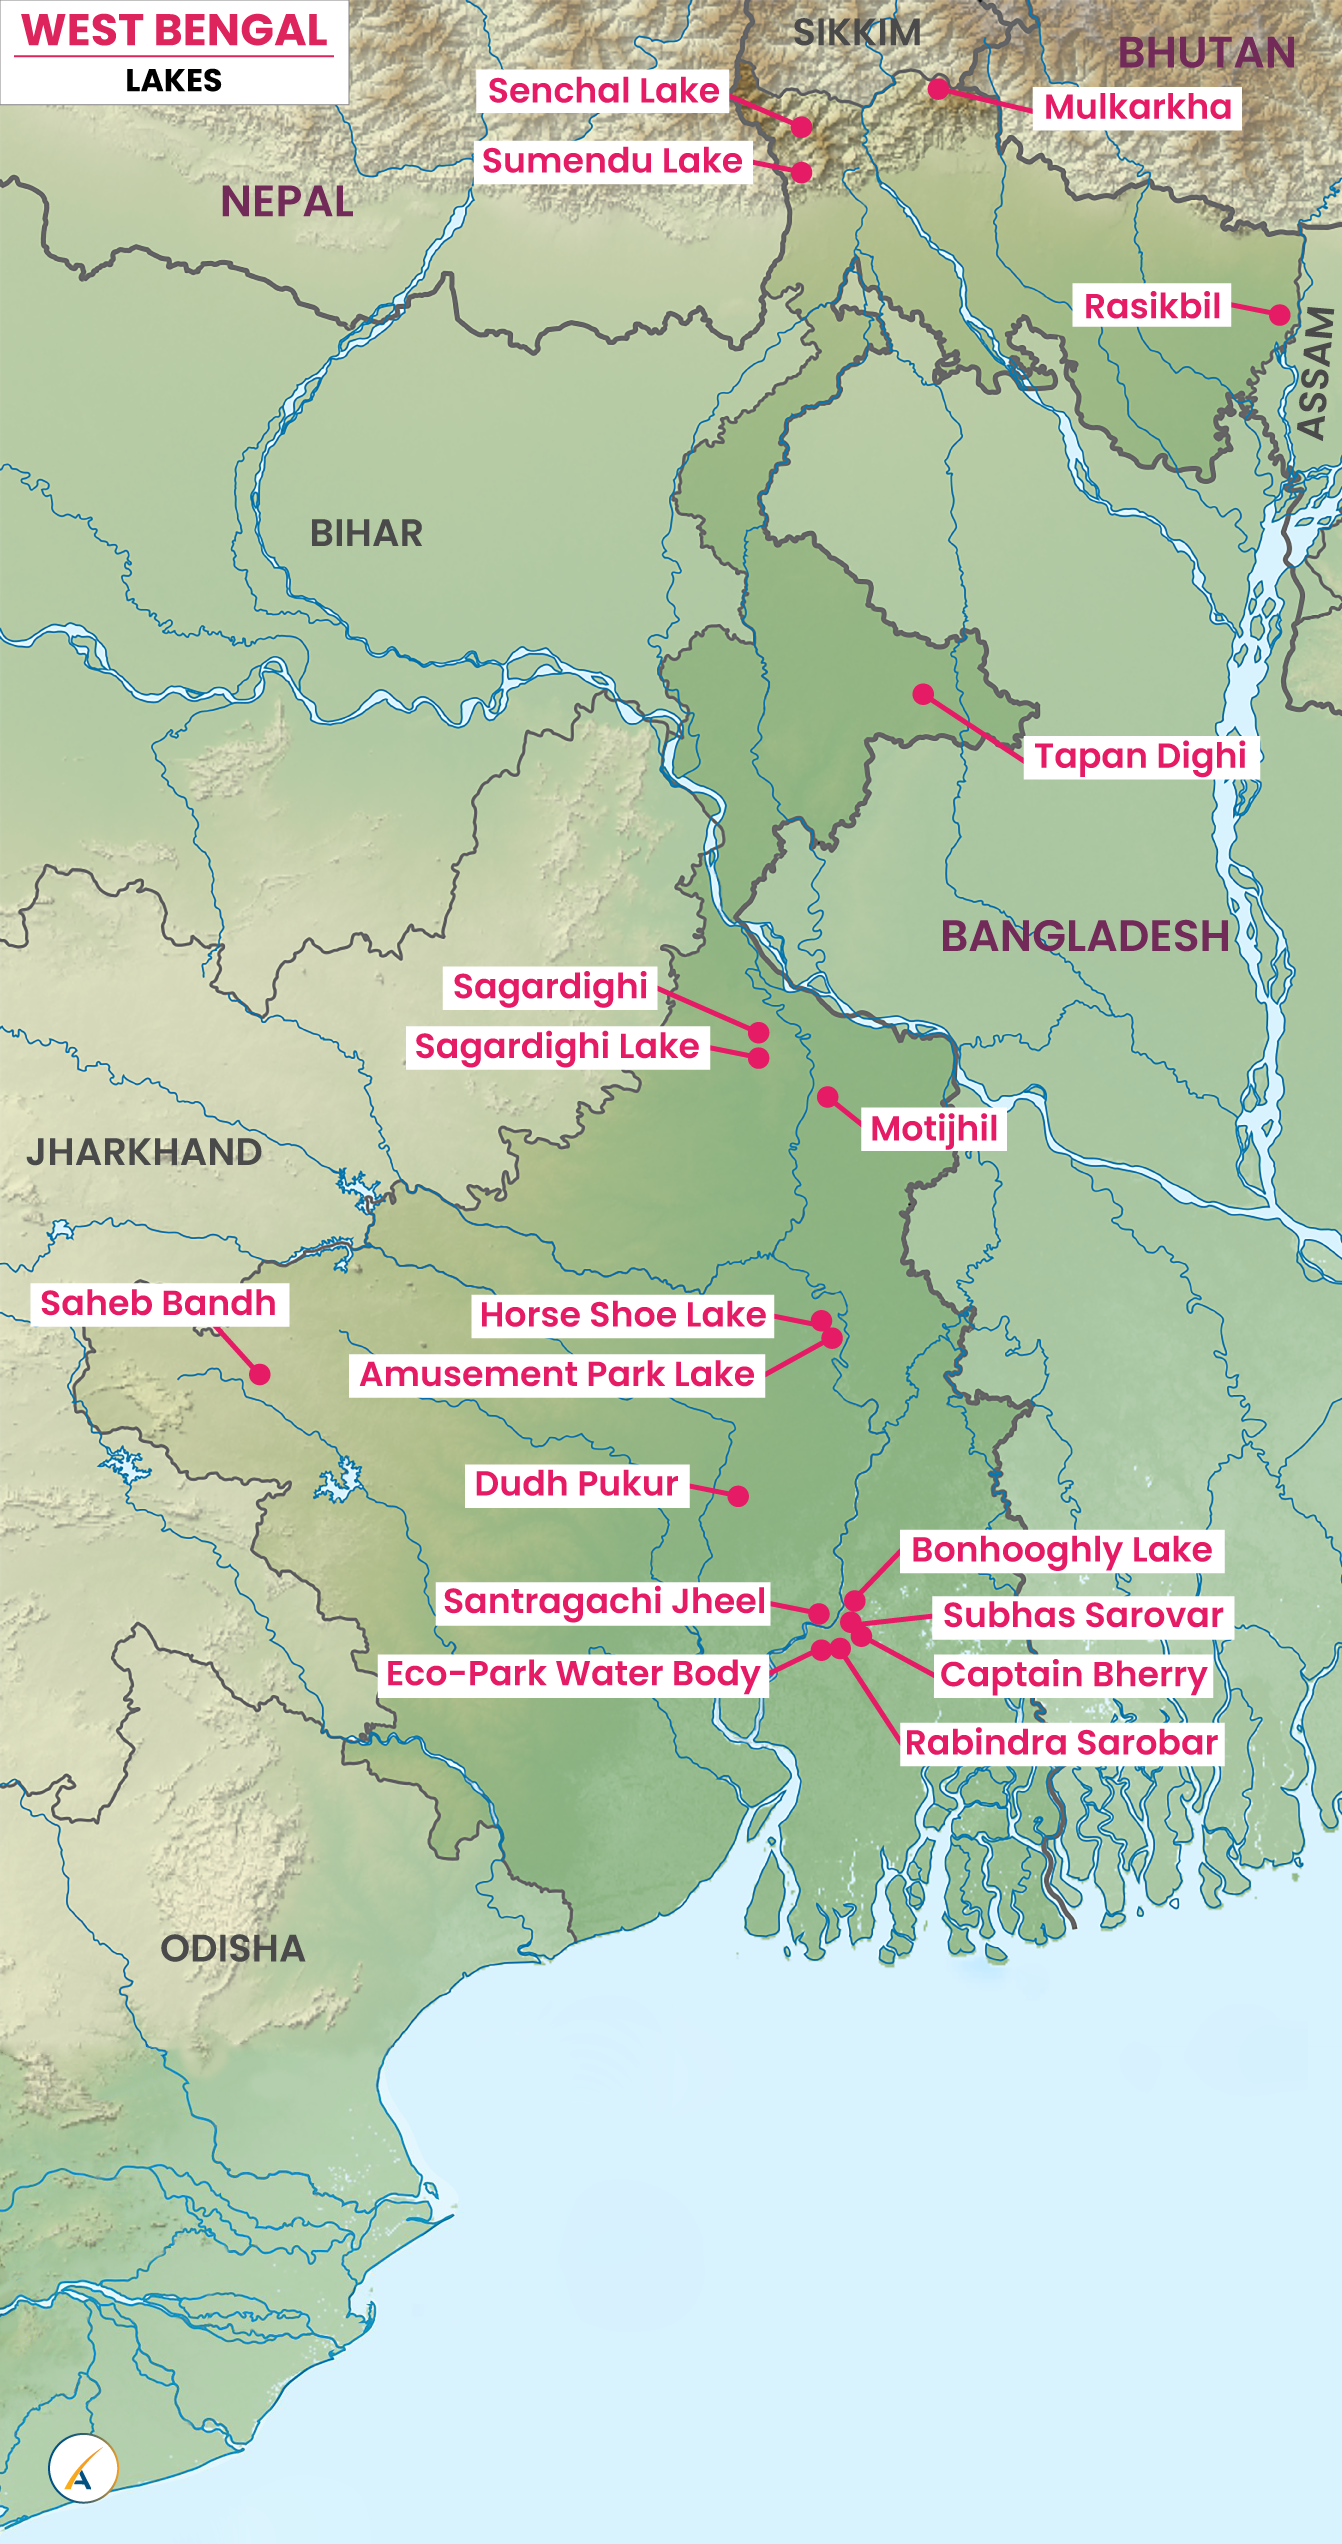 Lakes in West Bengal